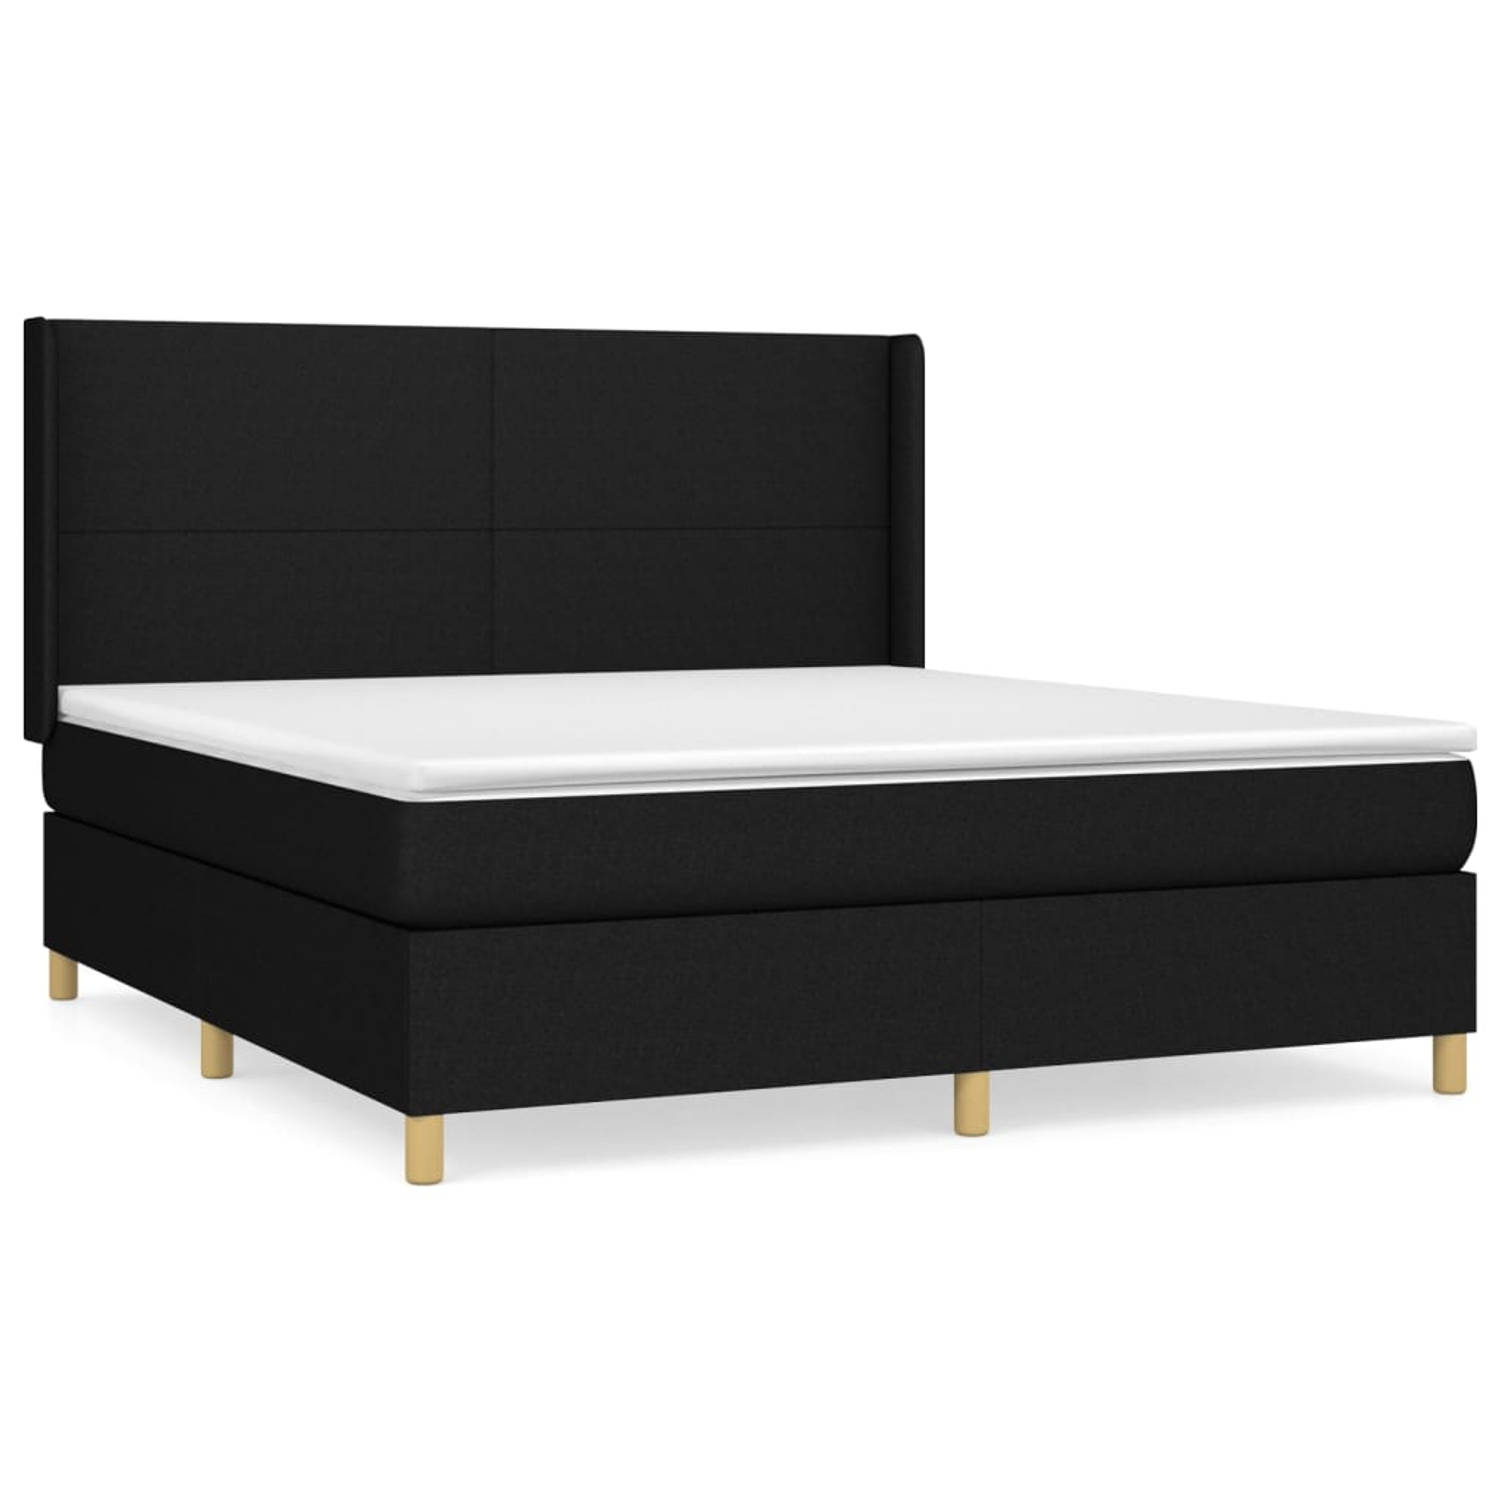 The Living Store Boxspringbed - Comfort - Bed - 203 x 183 x 118/128 cm - Zwart